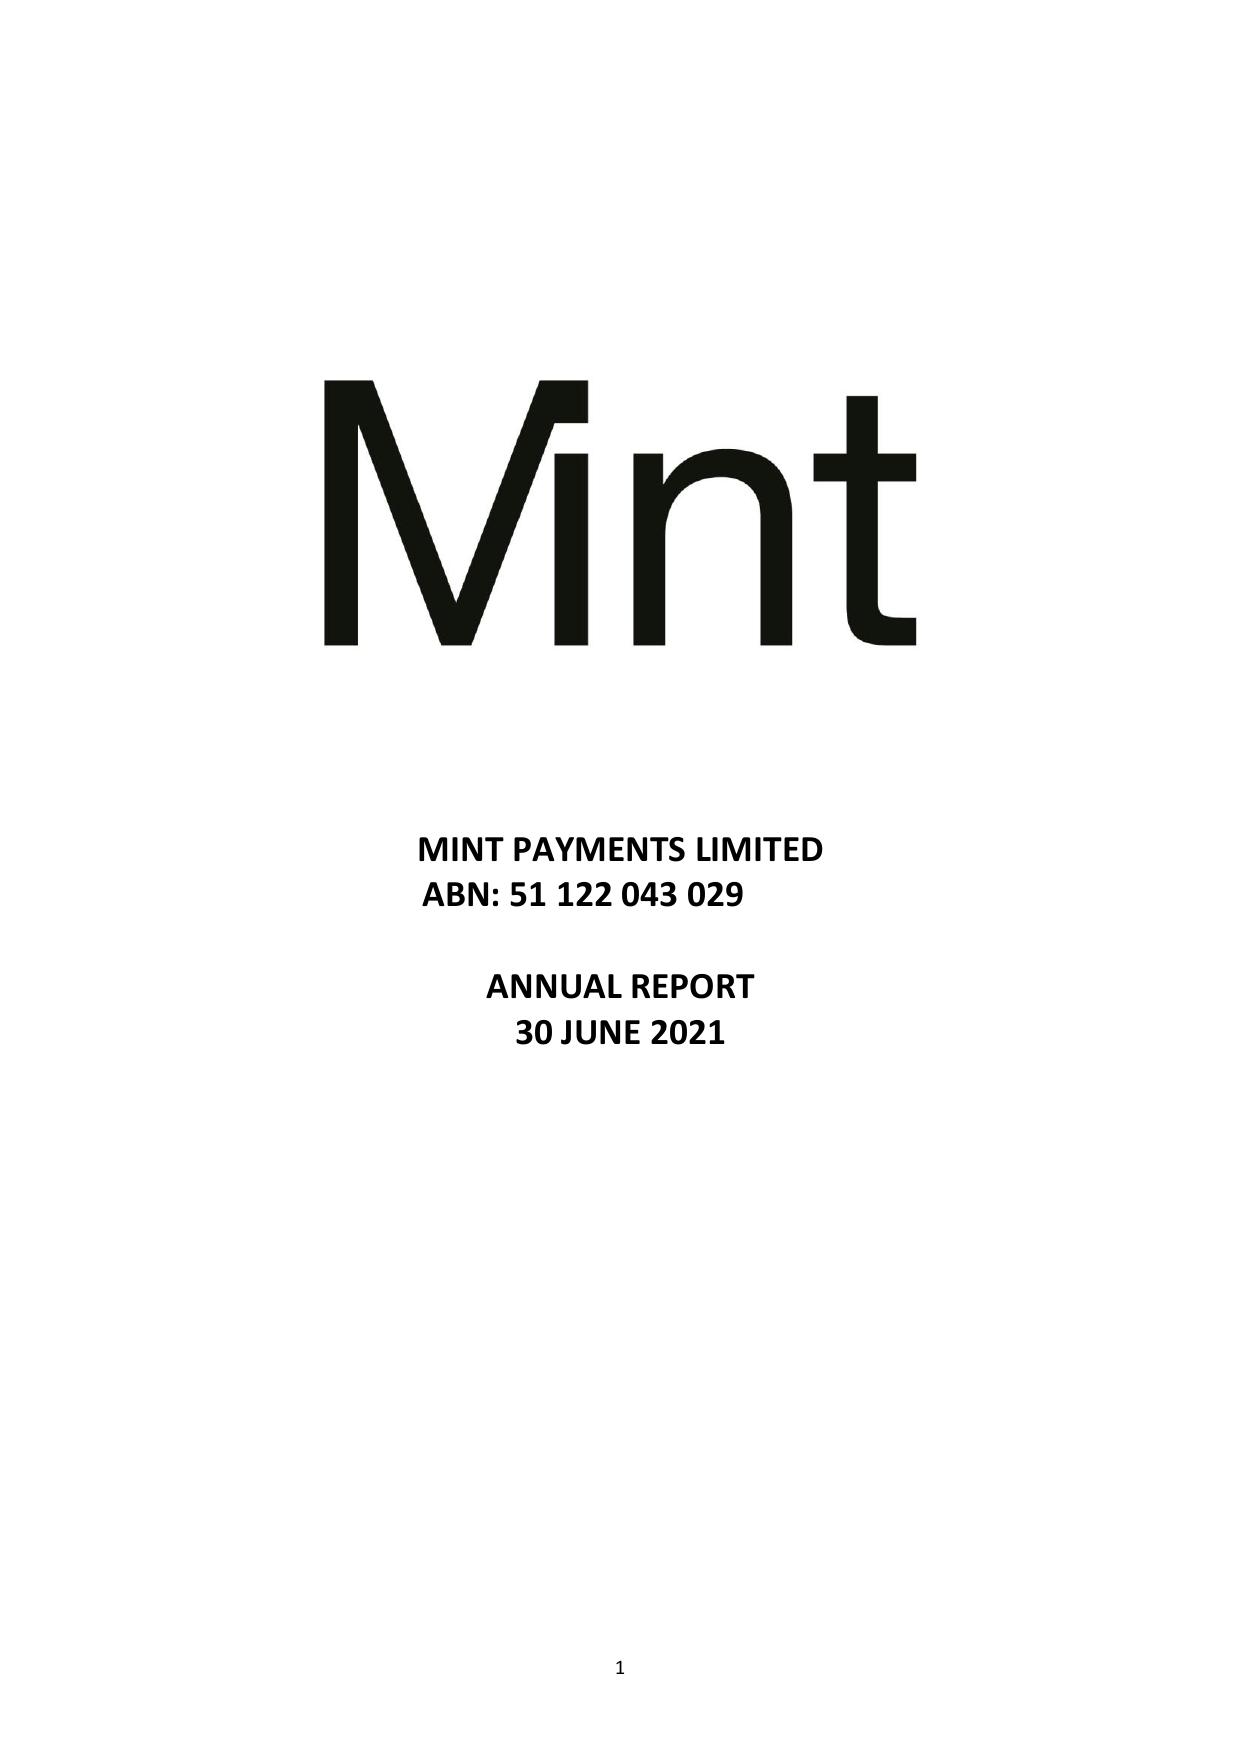 MINTPAYMENTS 2021 Annual Report